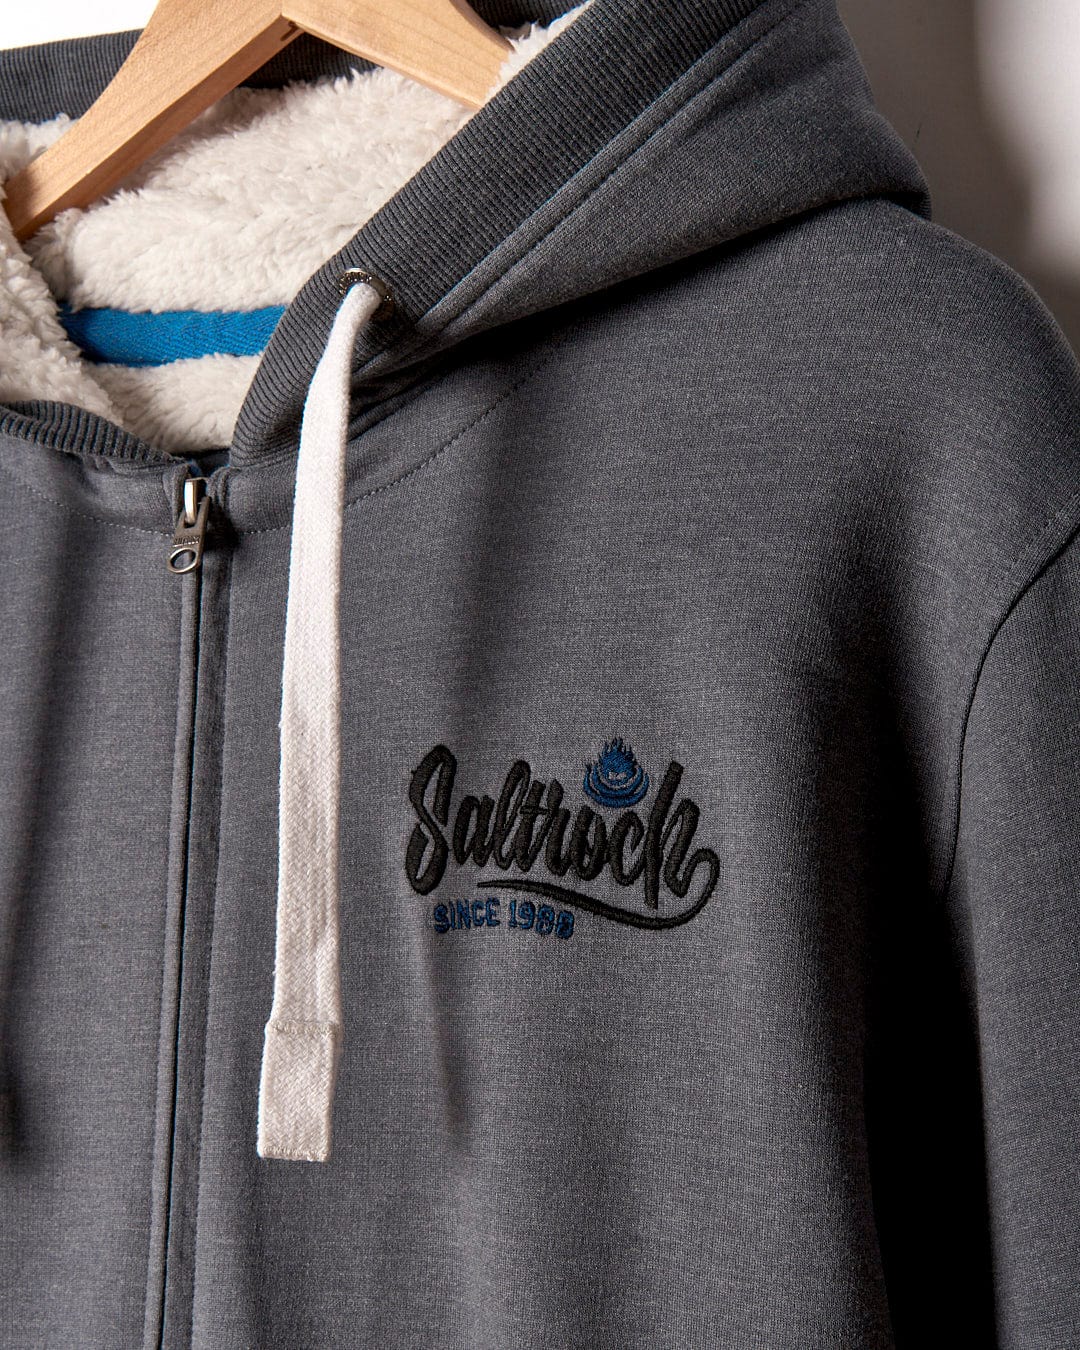 A Speed - Mens Borg Lined Hoodie in grey with a Saltrock logo on it.